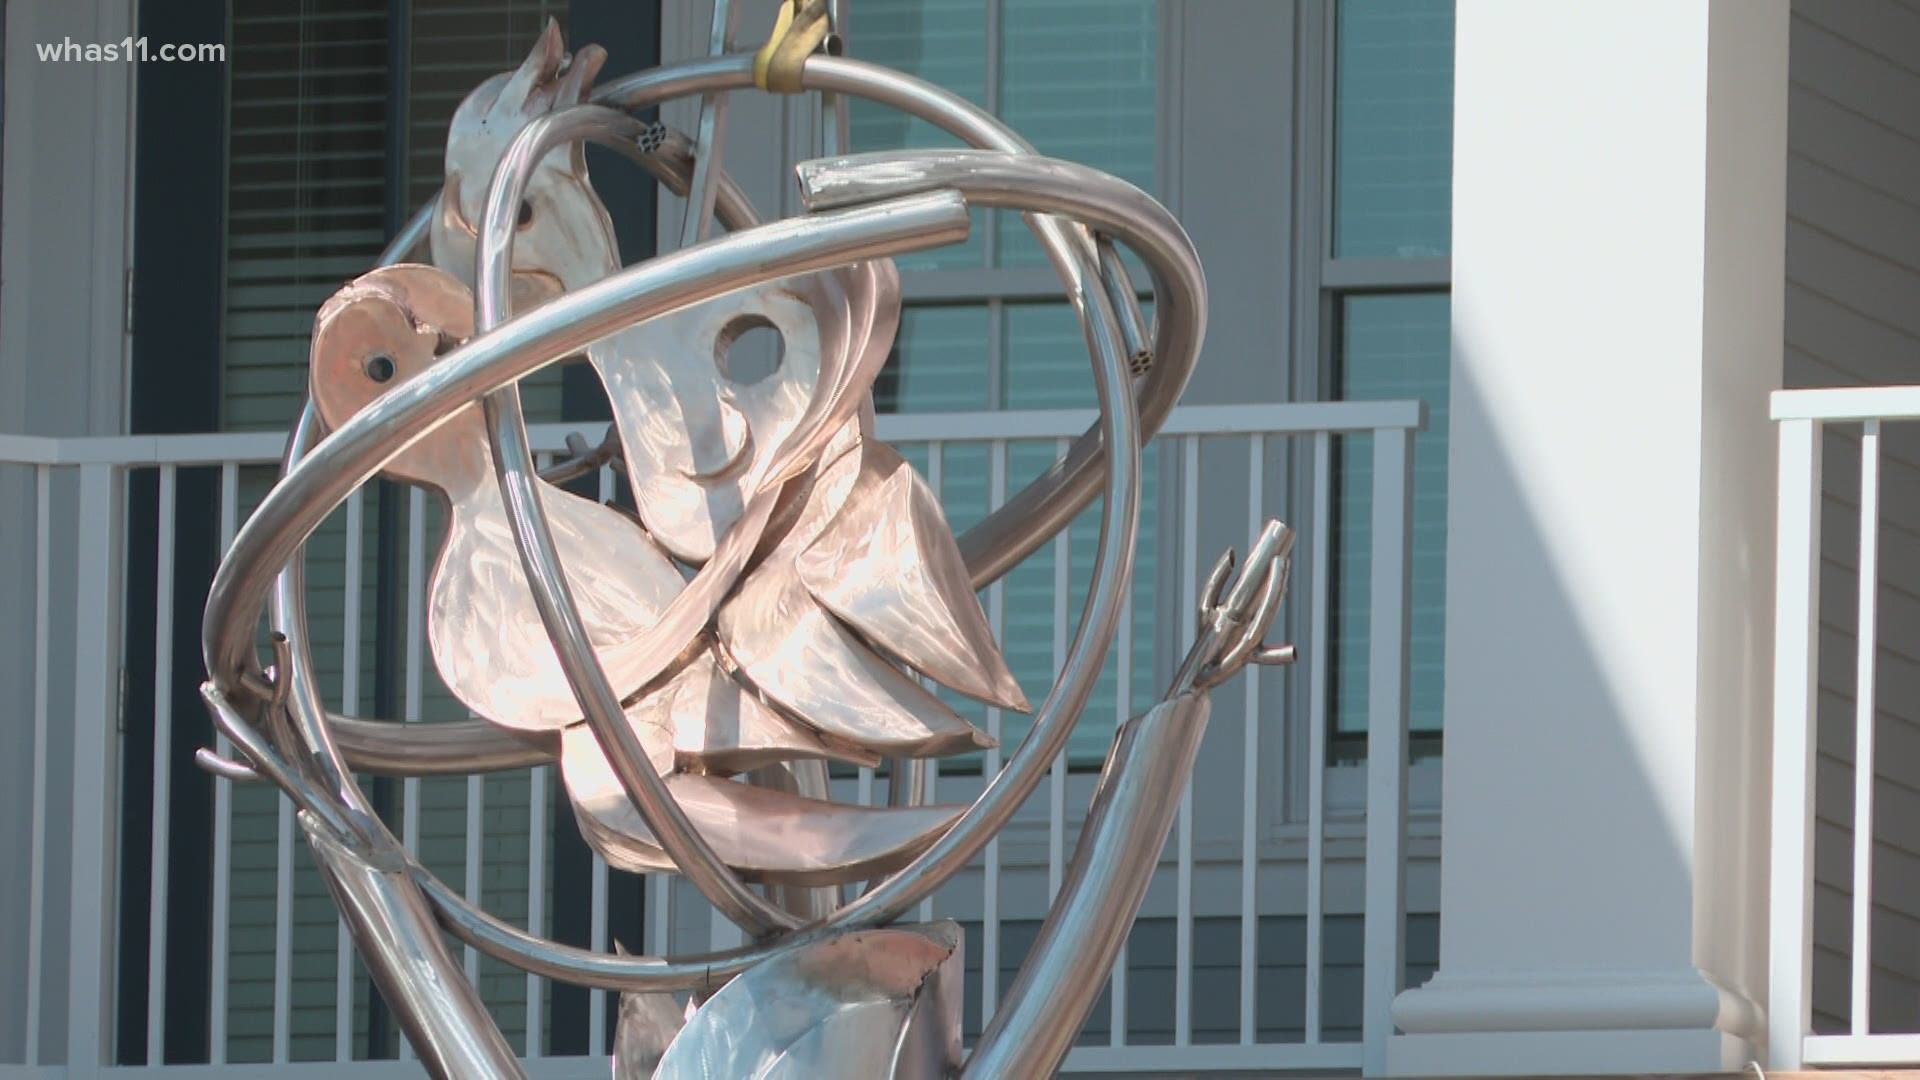 Following a hiatus in 2020, the Norton Commons Art Show returns this weekend. A new sculpture by Louisville native Gary Bibbs was unveiled on Peppermint Street.